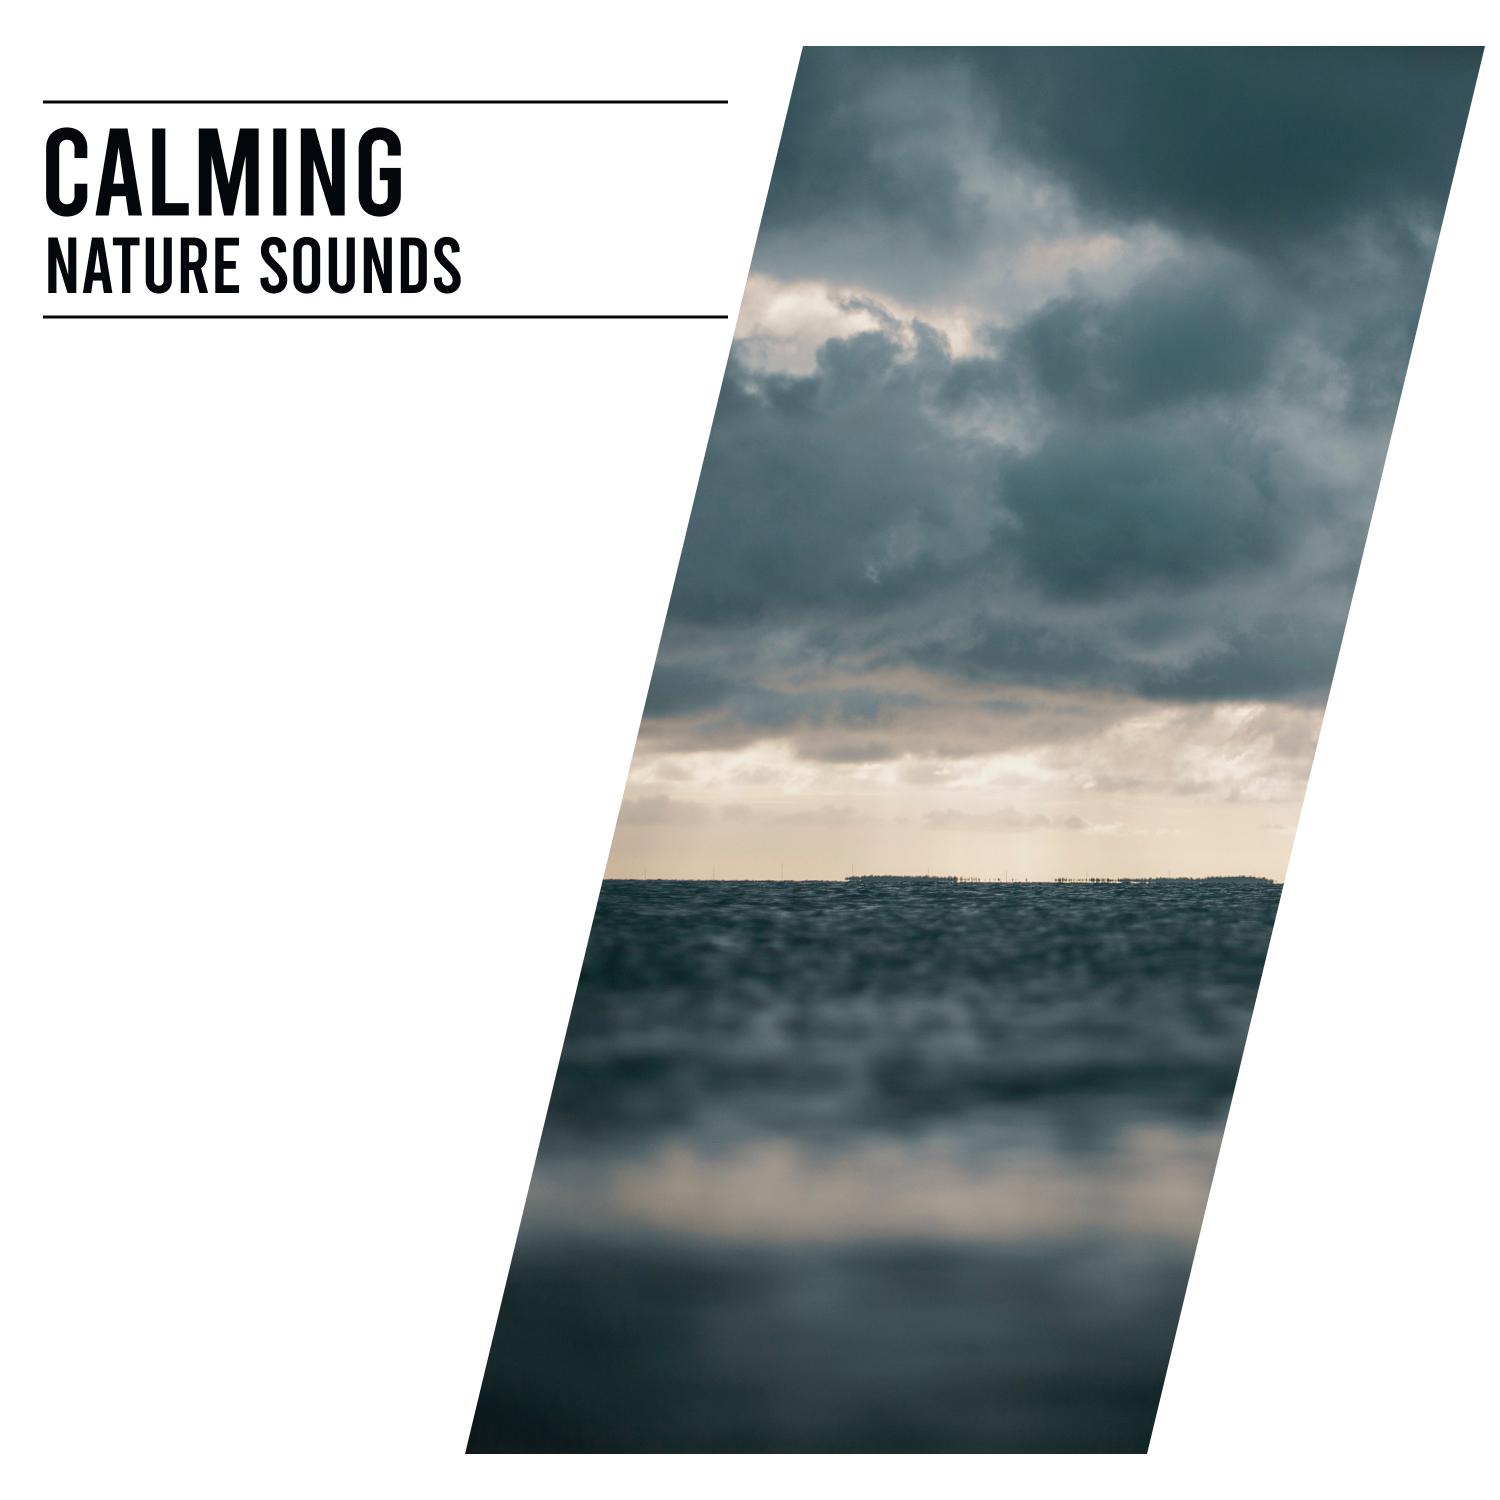 14 Meditation Sounds - Ambient and Calming Nature Sounds